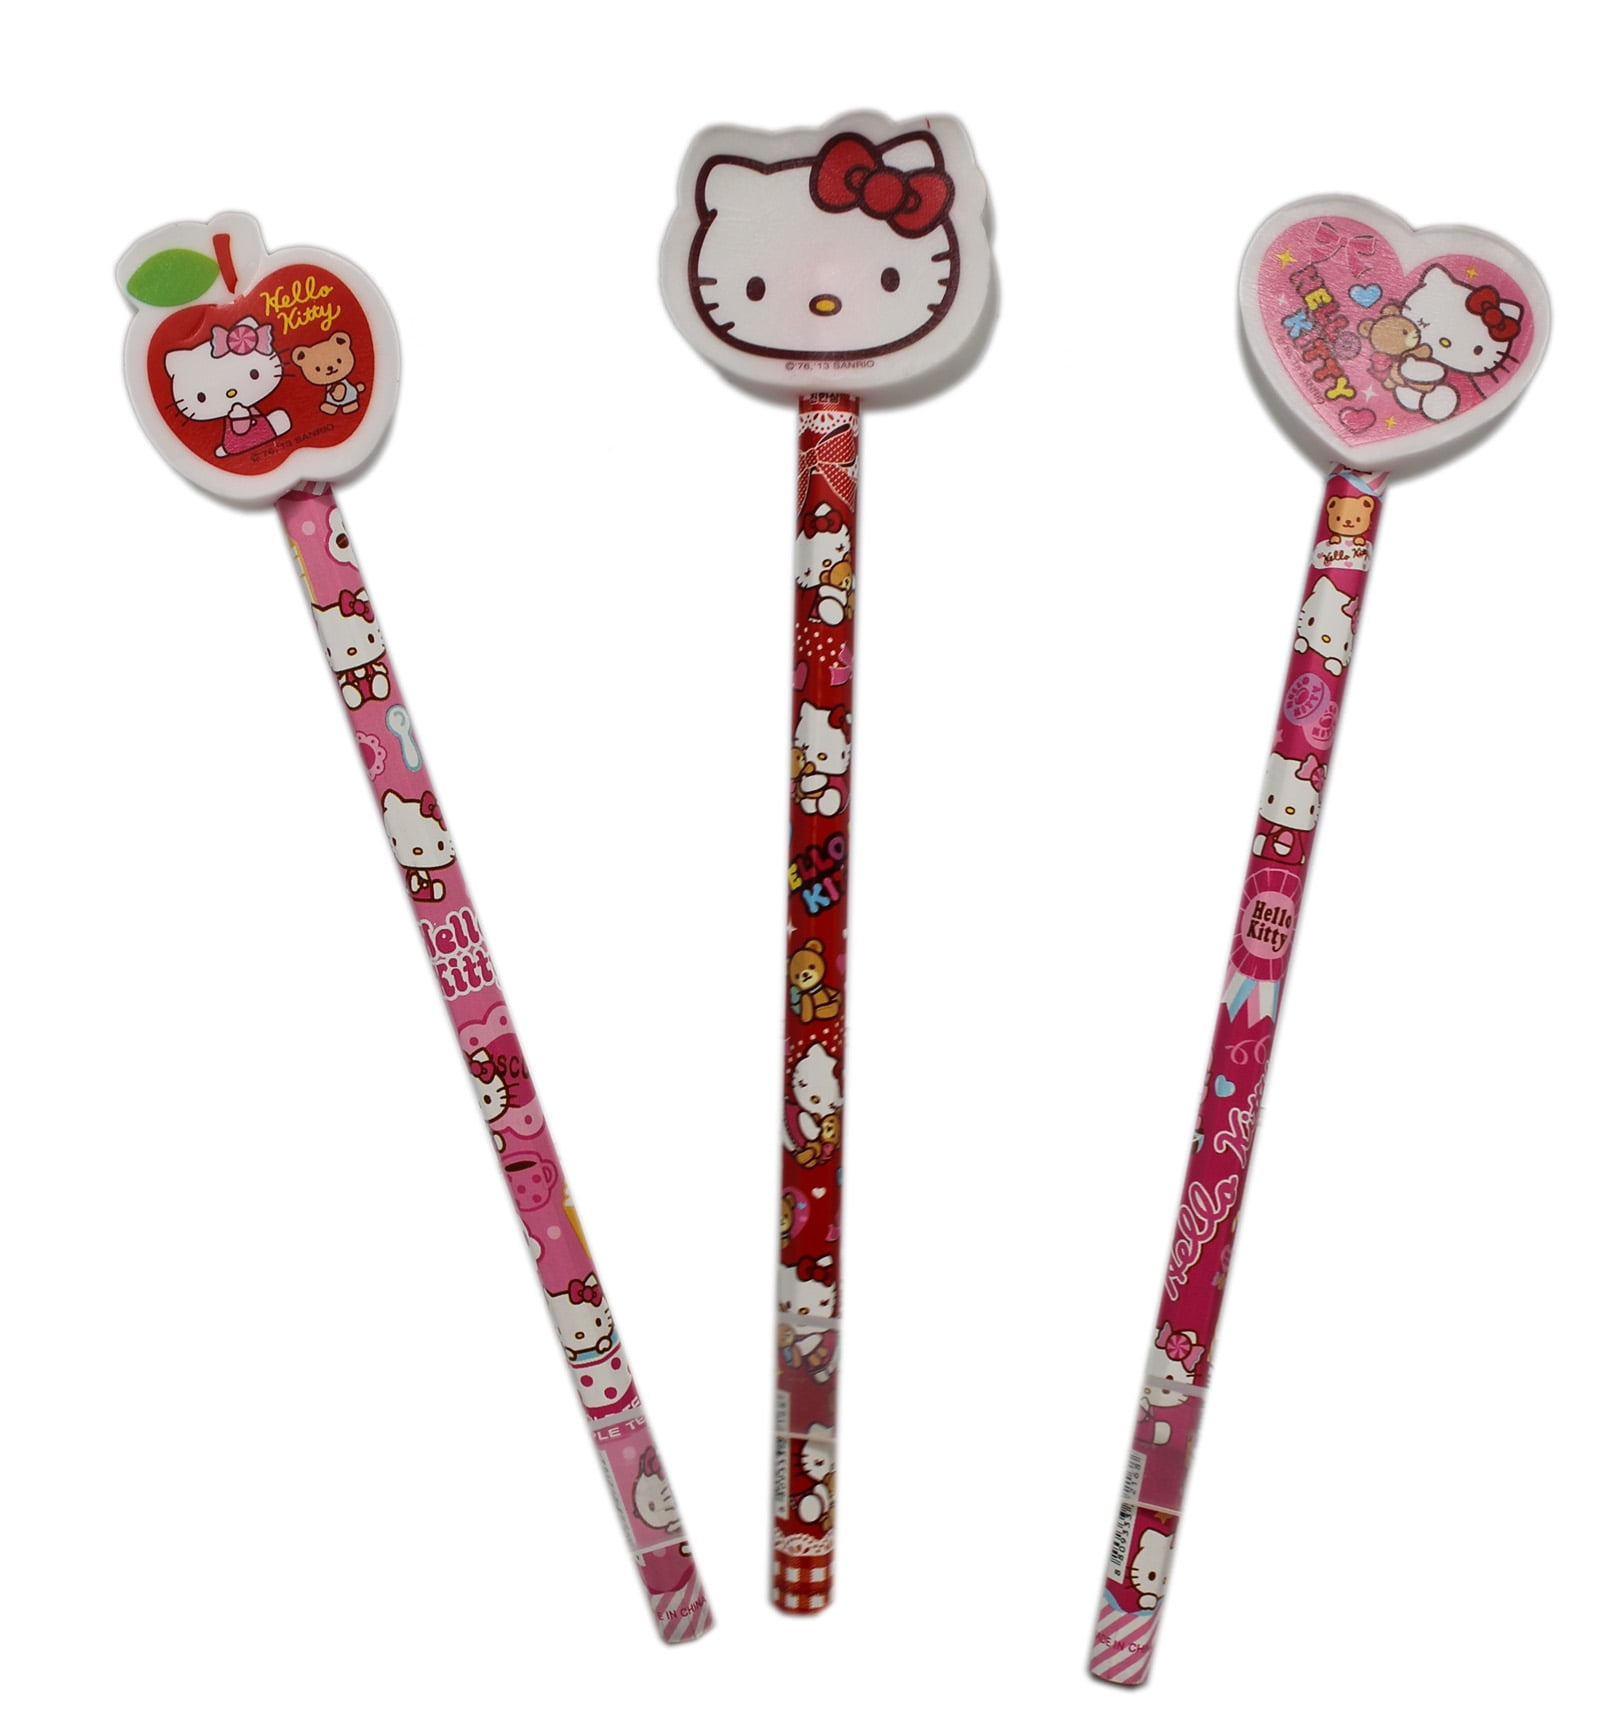 Hello Kitty Assorted Pencil Set w/Large Eraser Tops (3pc) 